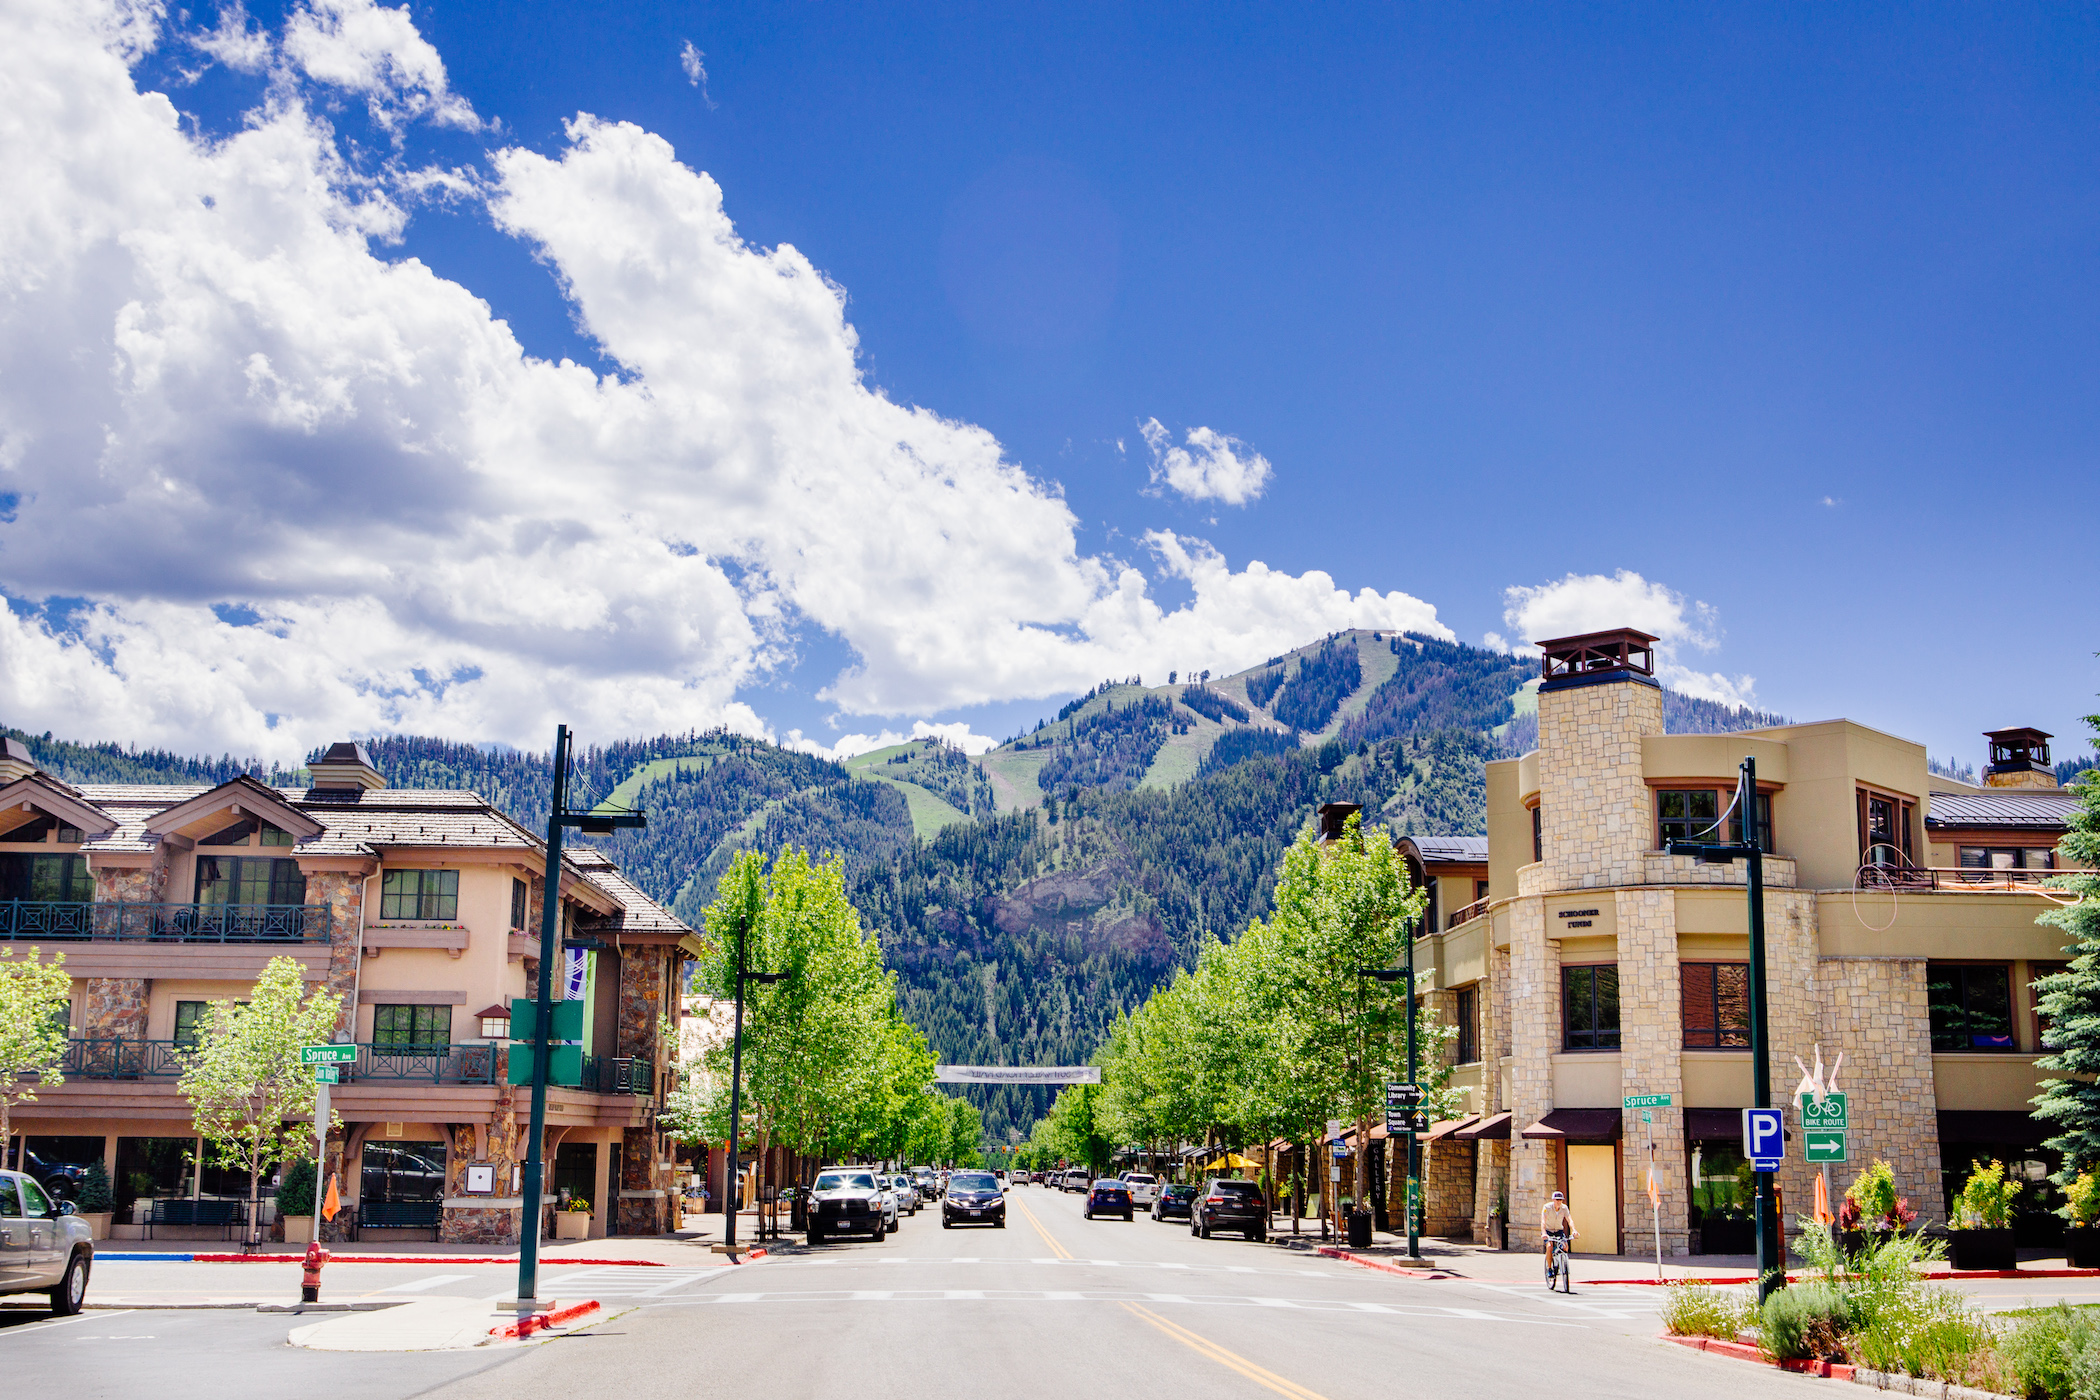 Sun Valley is Our New Favorite Destination for an Arts & Culture